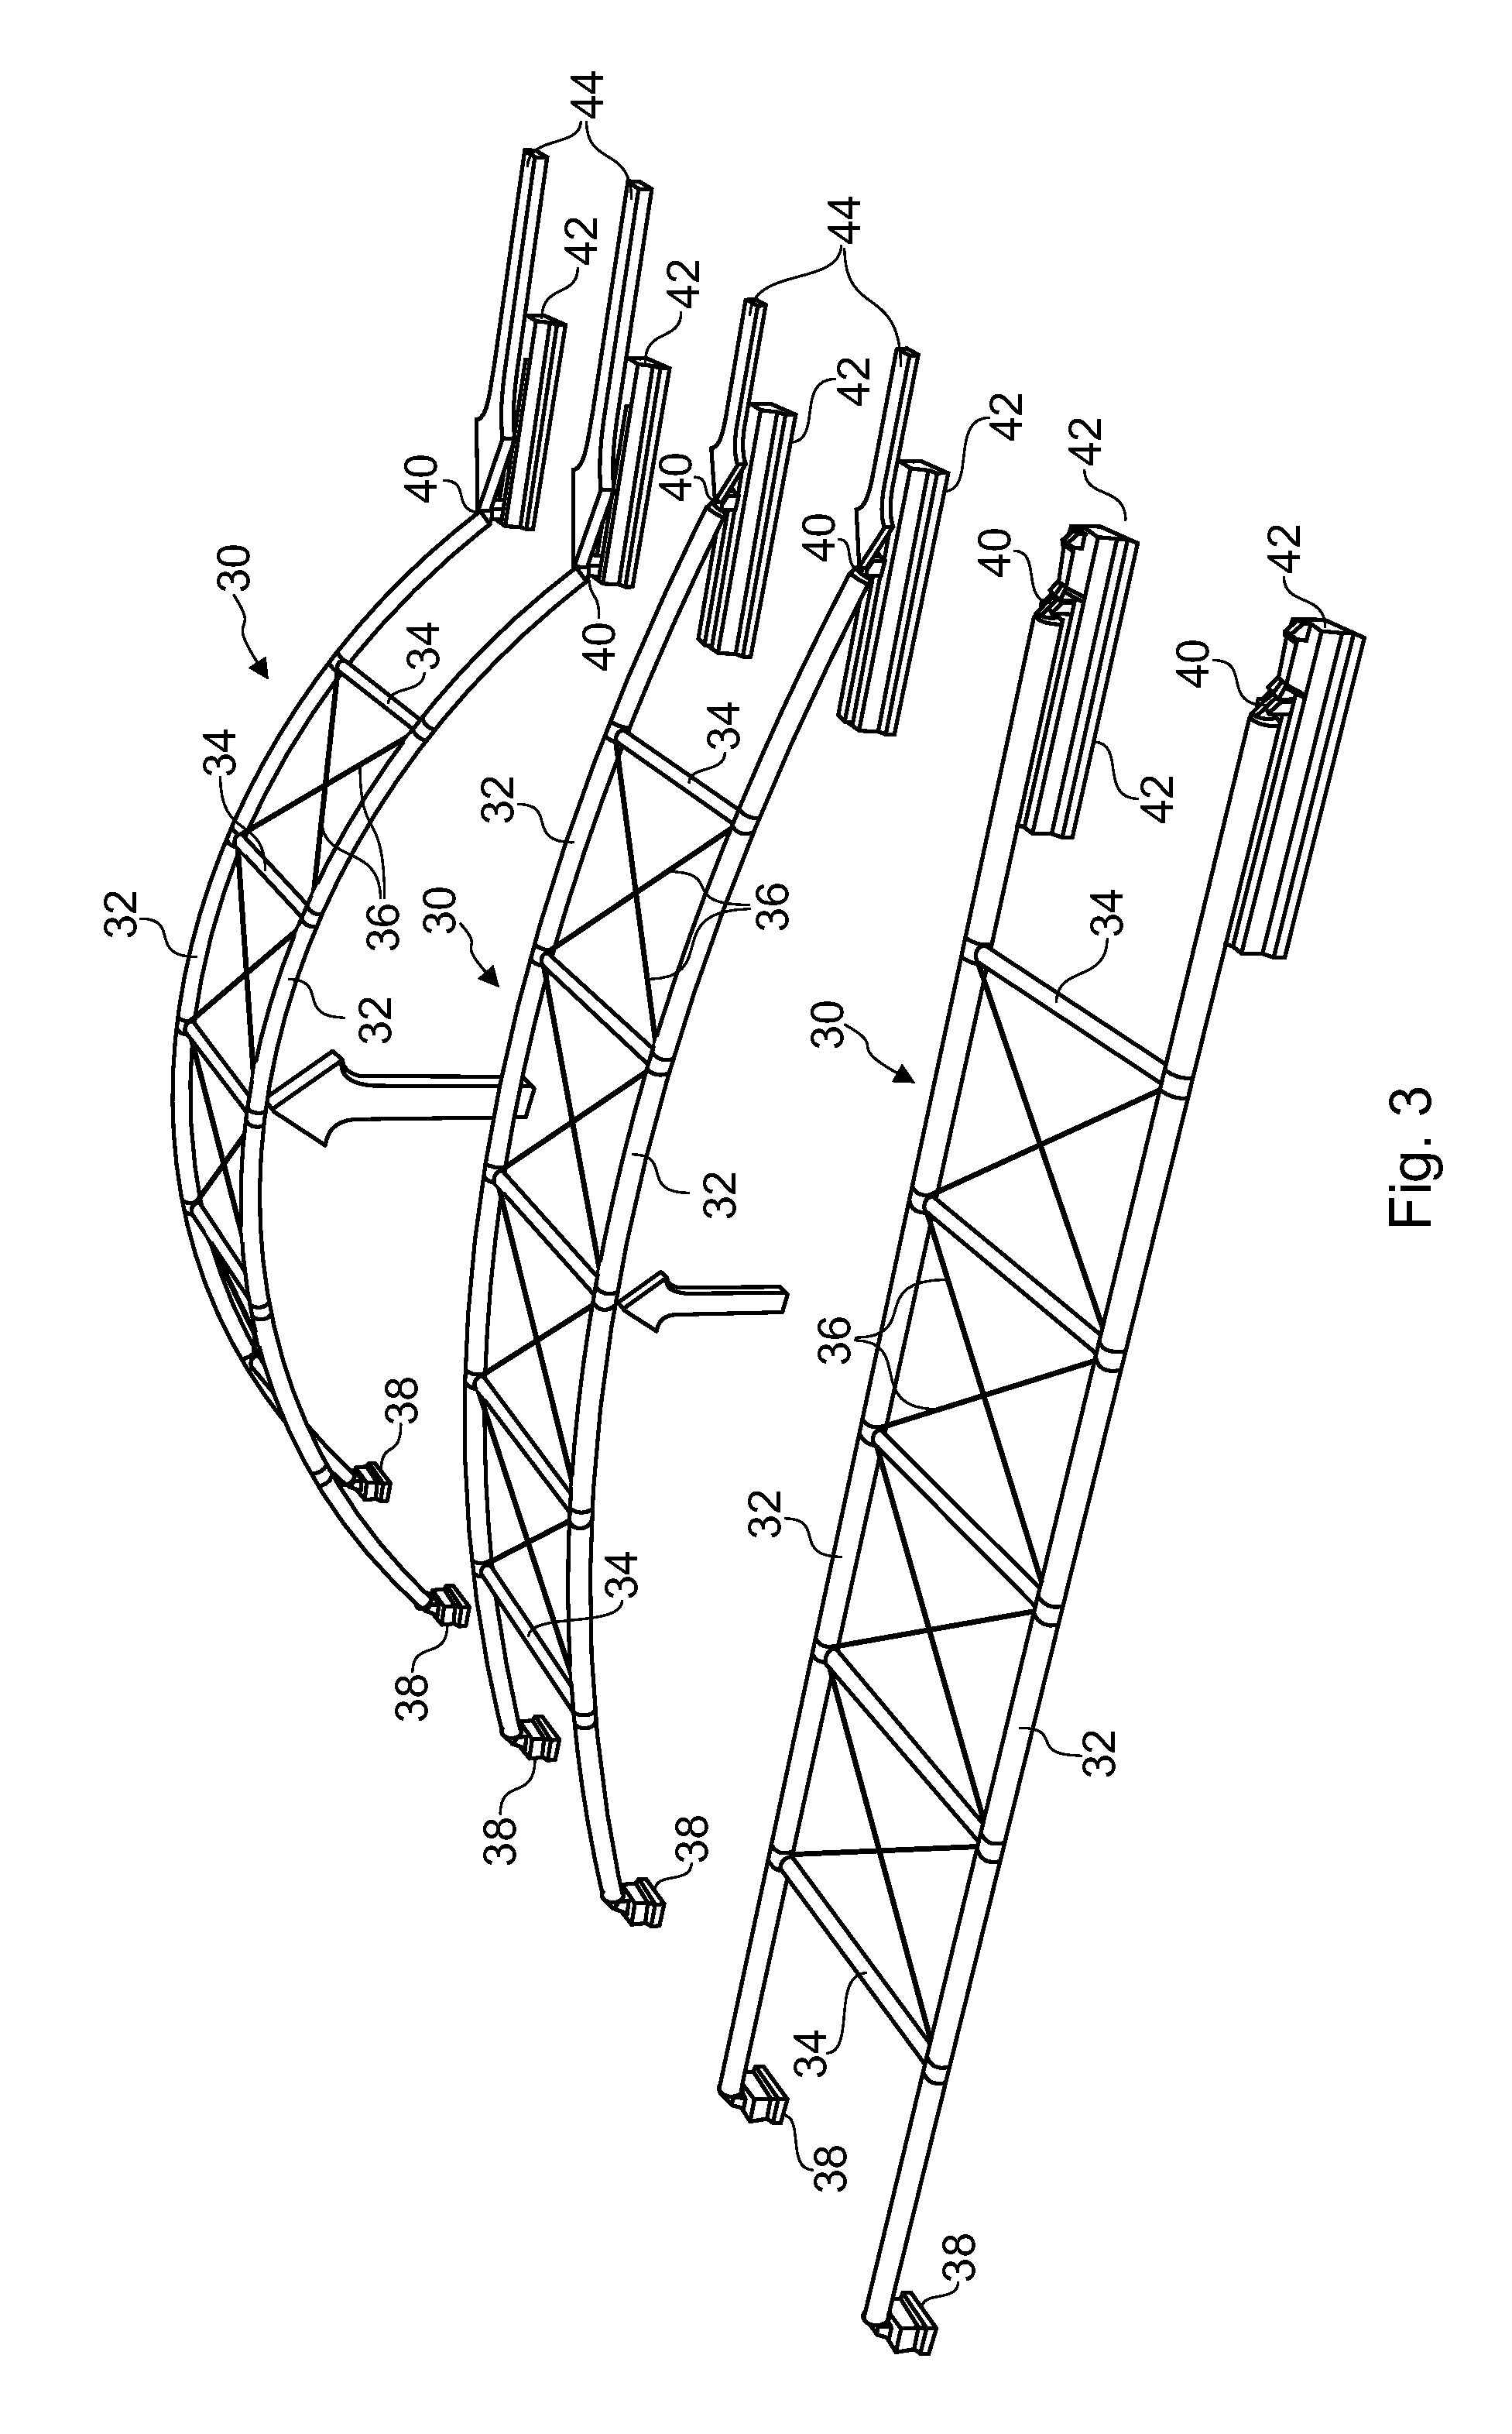 Supporting arch structure construction method